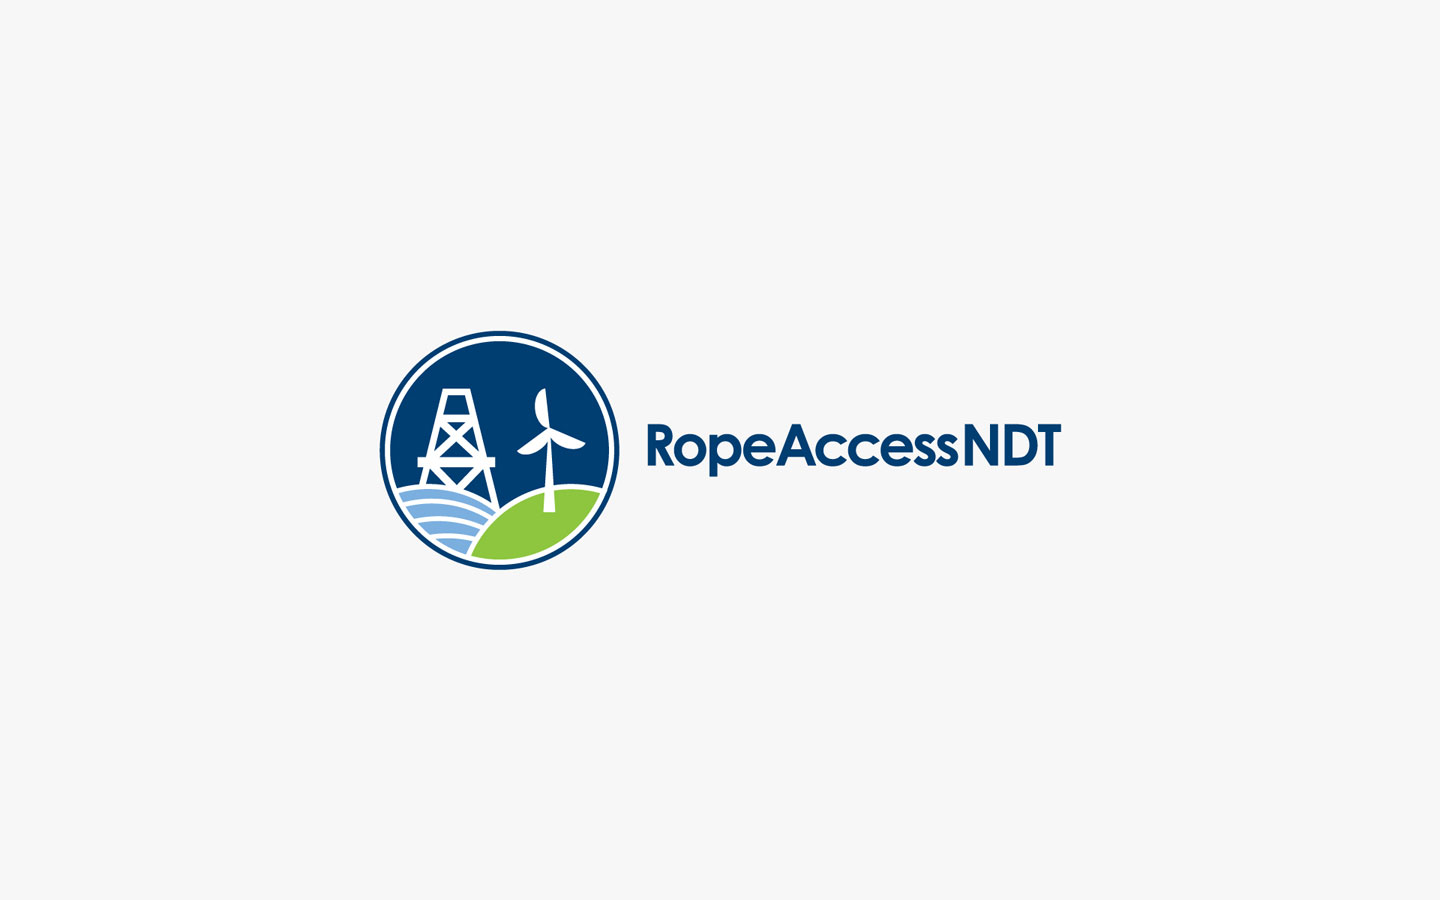 Rope Access NDT, Logo Design in Brand Colours